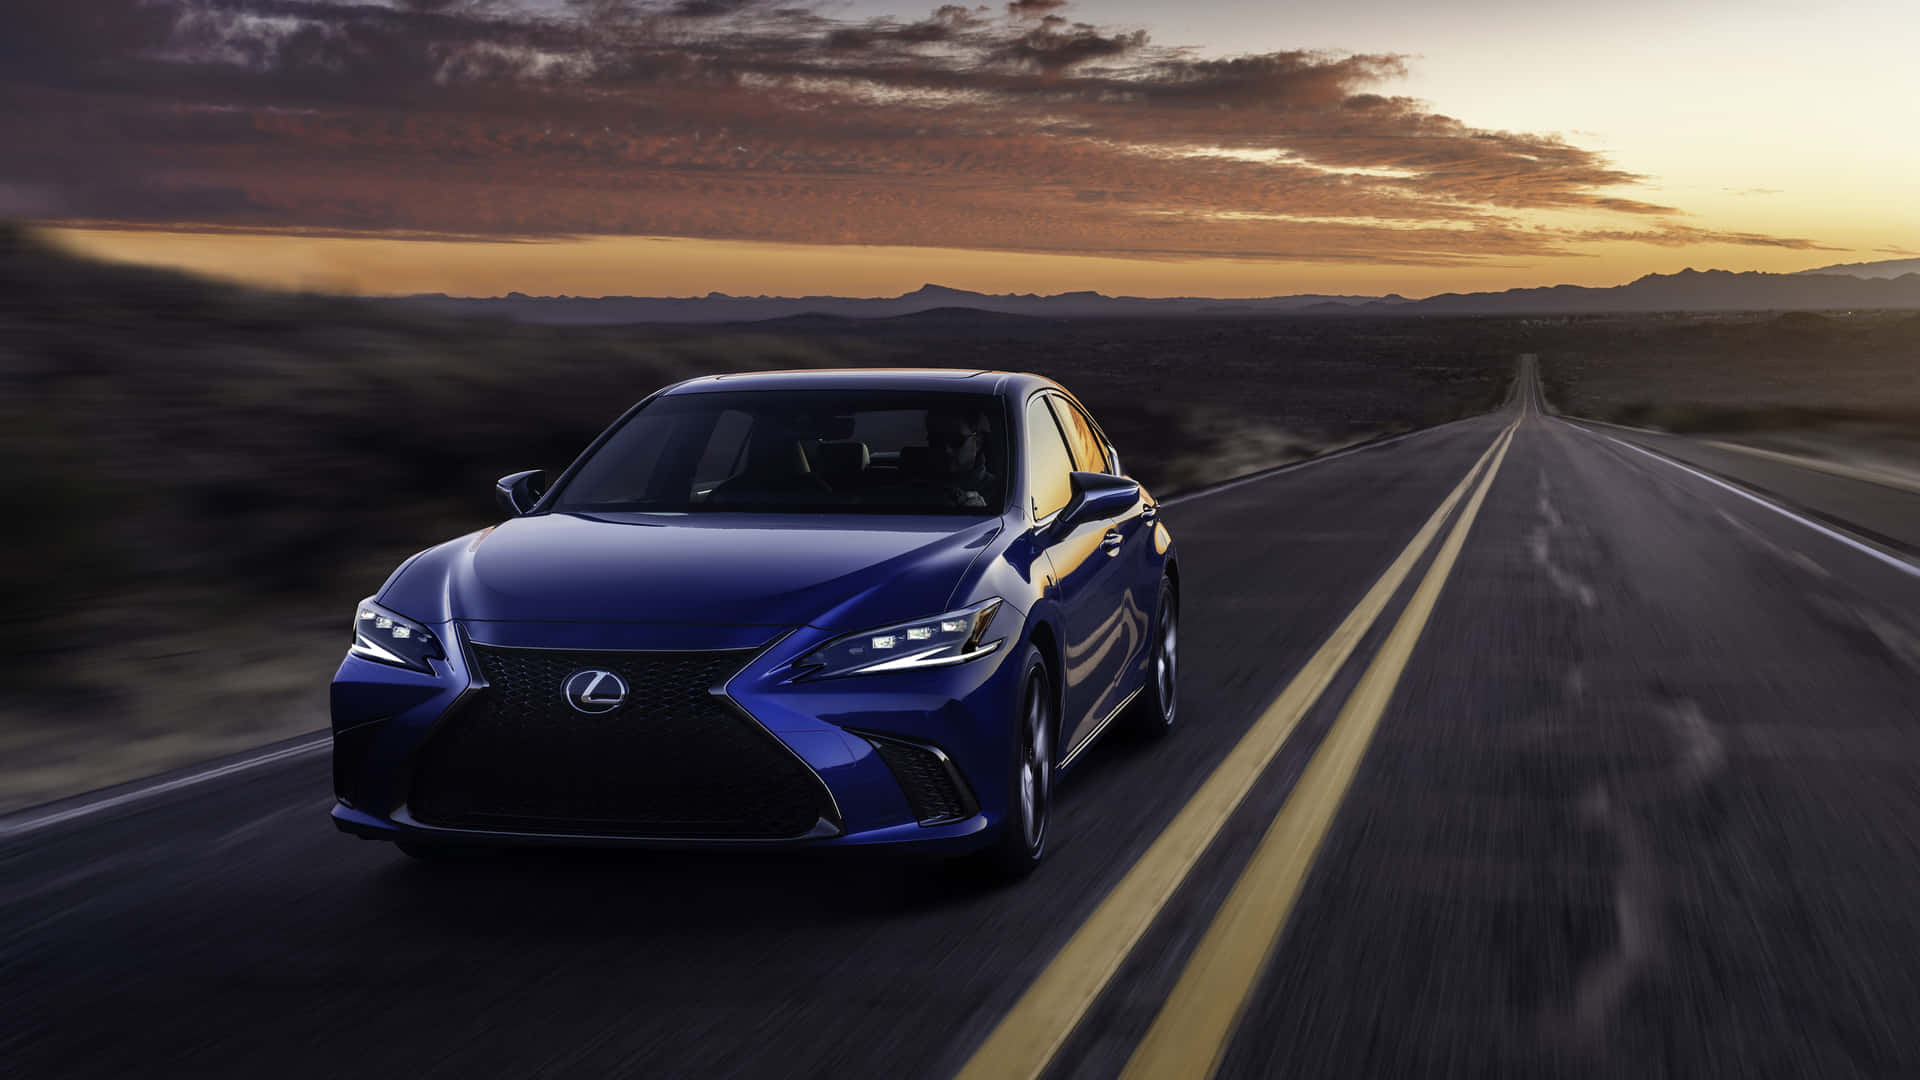 The 2019 Lexus Cs Driving Down A Road At Sunset Background